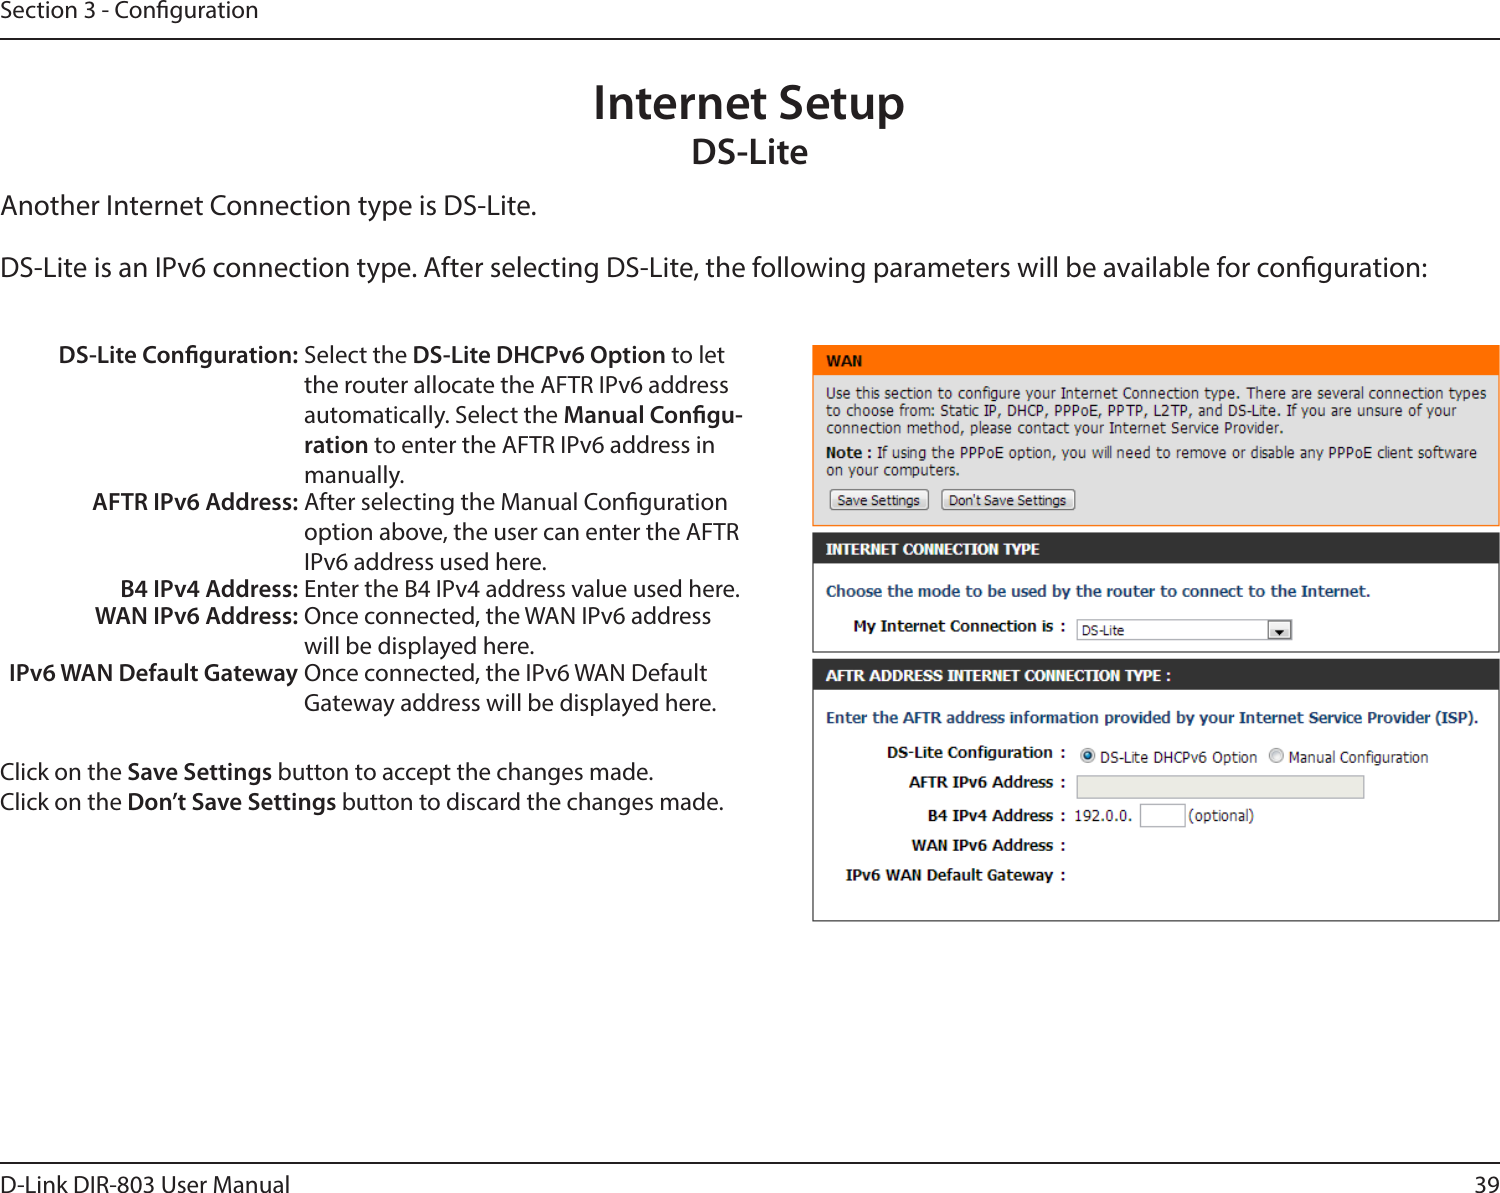 39D-Link DIR-803 User ManualSection 3 - CongurationInternet SetupDS-LiteAnother Internet Connection type is DS-Lite.DS-Lite is an IPv6 connection type. After selecting DS-Lite, the following parameters will be available for conguration:DS-Lite Conguration: Select the DS-Lite DHCPv6 Option to let the router allocate the AFTR IPv6 address automatically. Select the Manual Congu-ration to enter the AFTR IPv6 address in manually.AFTR IPv6 Address: After selecting the Manual Conguration option above, the user can enter the AFTR IPv6 address used here.B4 IPv4 Address: Enter the B4 IPv4 address value used here.WAN IPv6 Address: Once connected, the WAN IPv6 address will be displayed here.IPv6 WAN Default Gateway Once connected, the IPv6 WAN Default Gateway address will be displayed here.Click on the Save Settings button to accept the changes made.Click on the Don’t Save Settings button to discard the changes made.